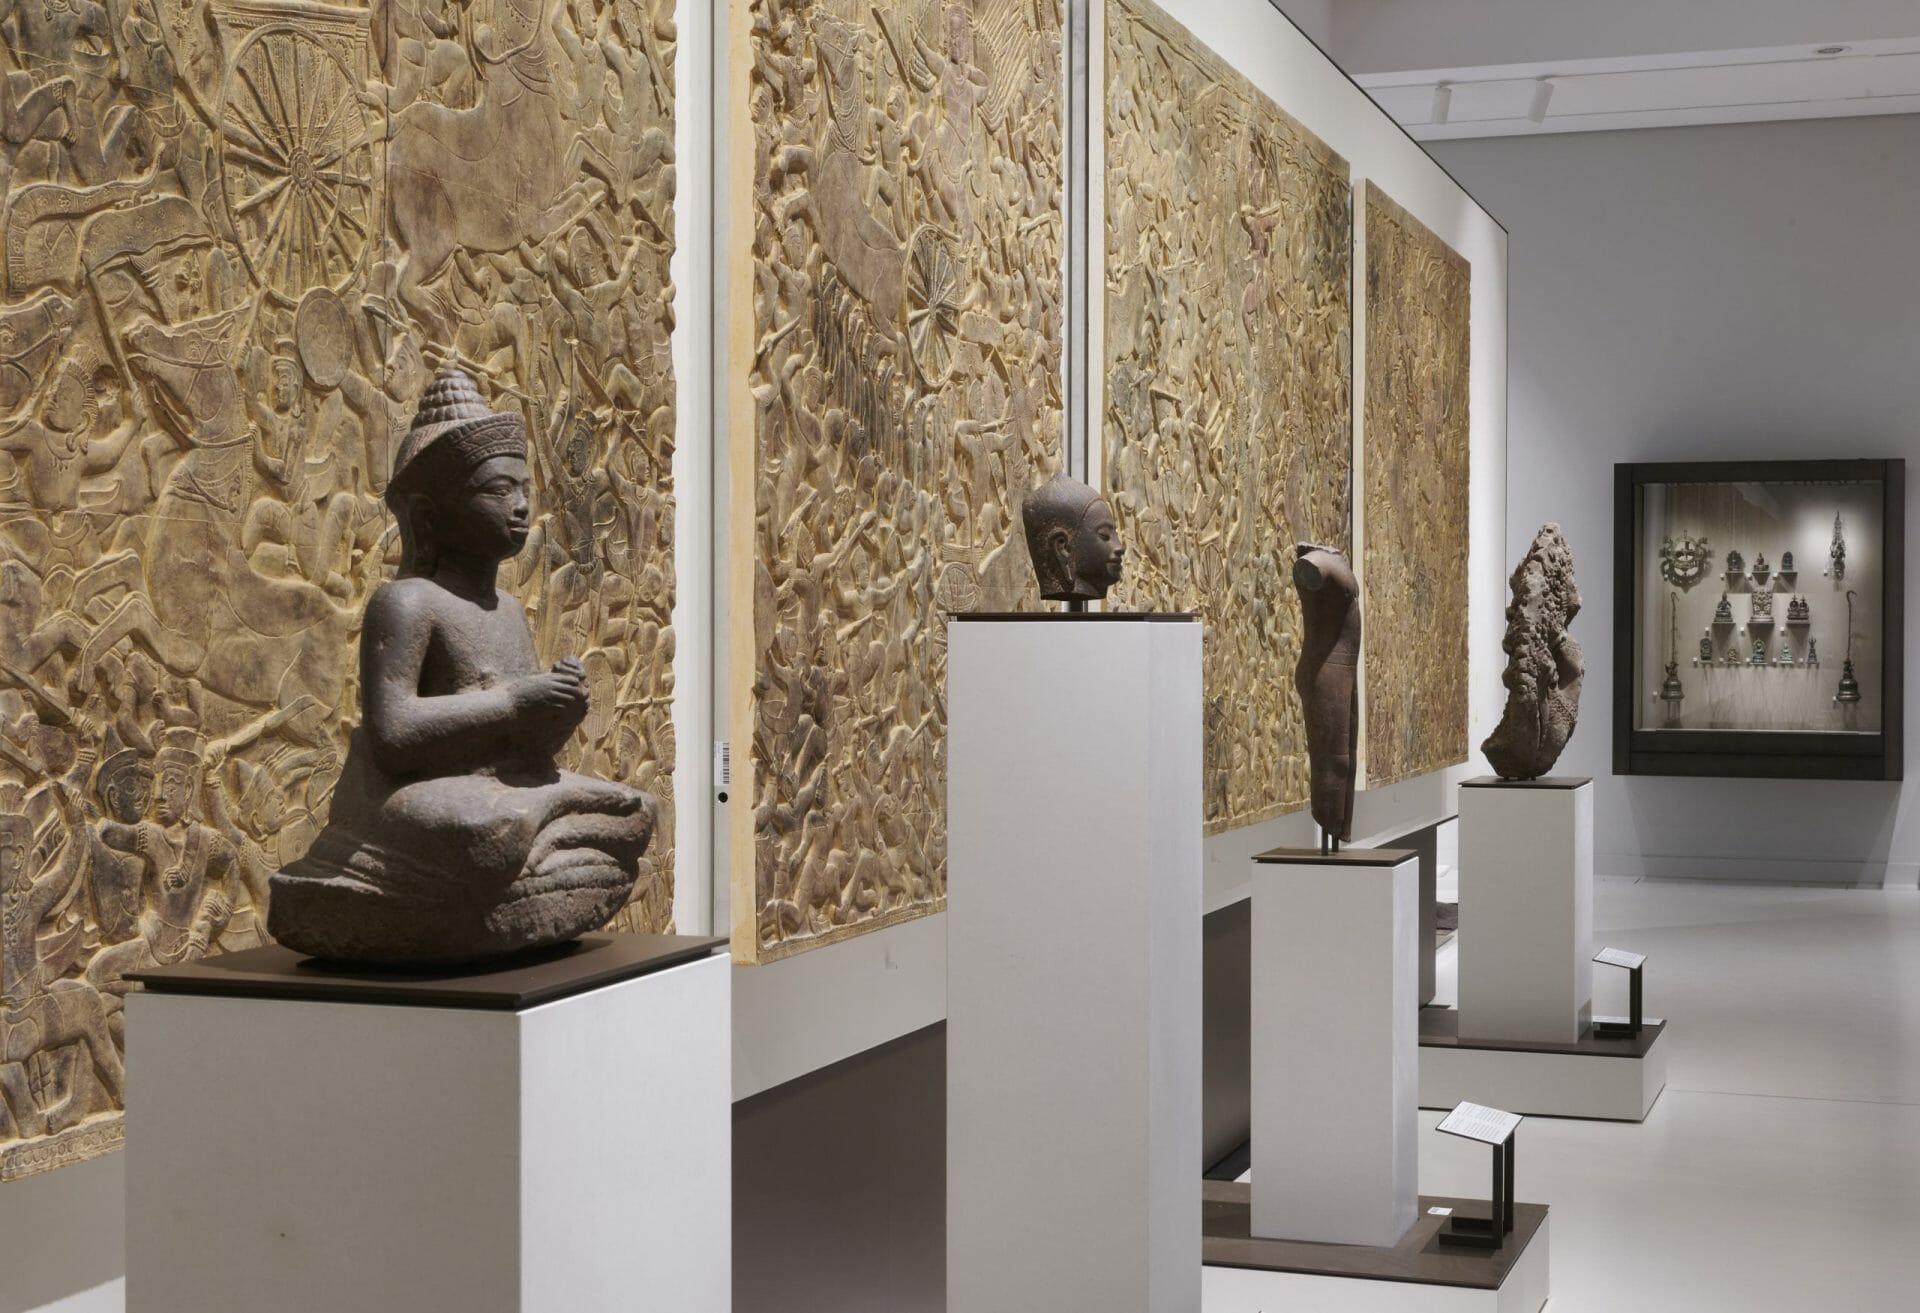 Freshly restored casts of reliefs from Angkor Wat, in the foreground sun or moon shining Bodhisattva (Thailand, 1182-1186), in the exhibition module “Southeast Asia” of the Asian Art Museum at the Humboldt Forum